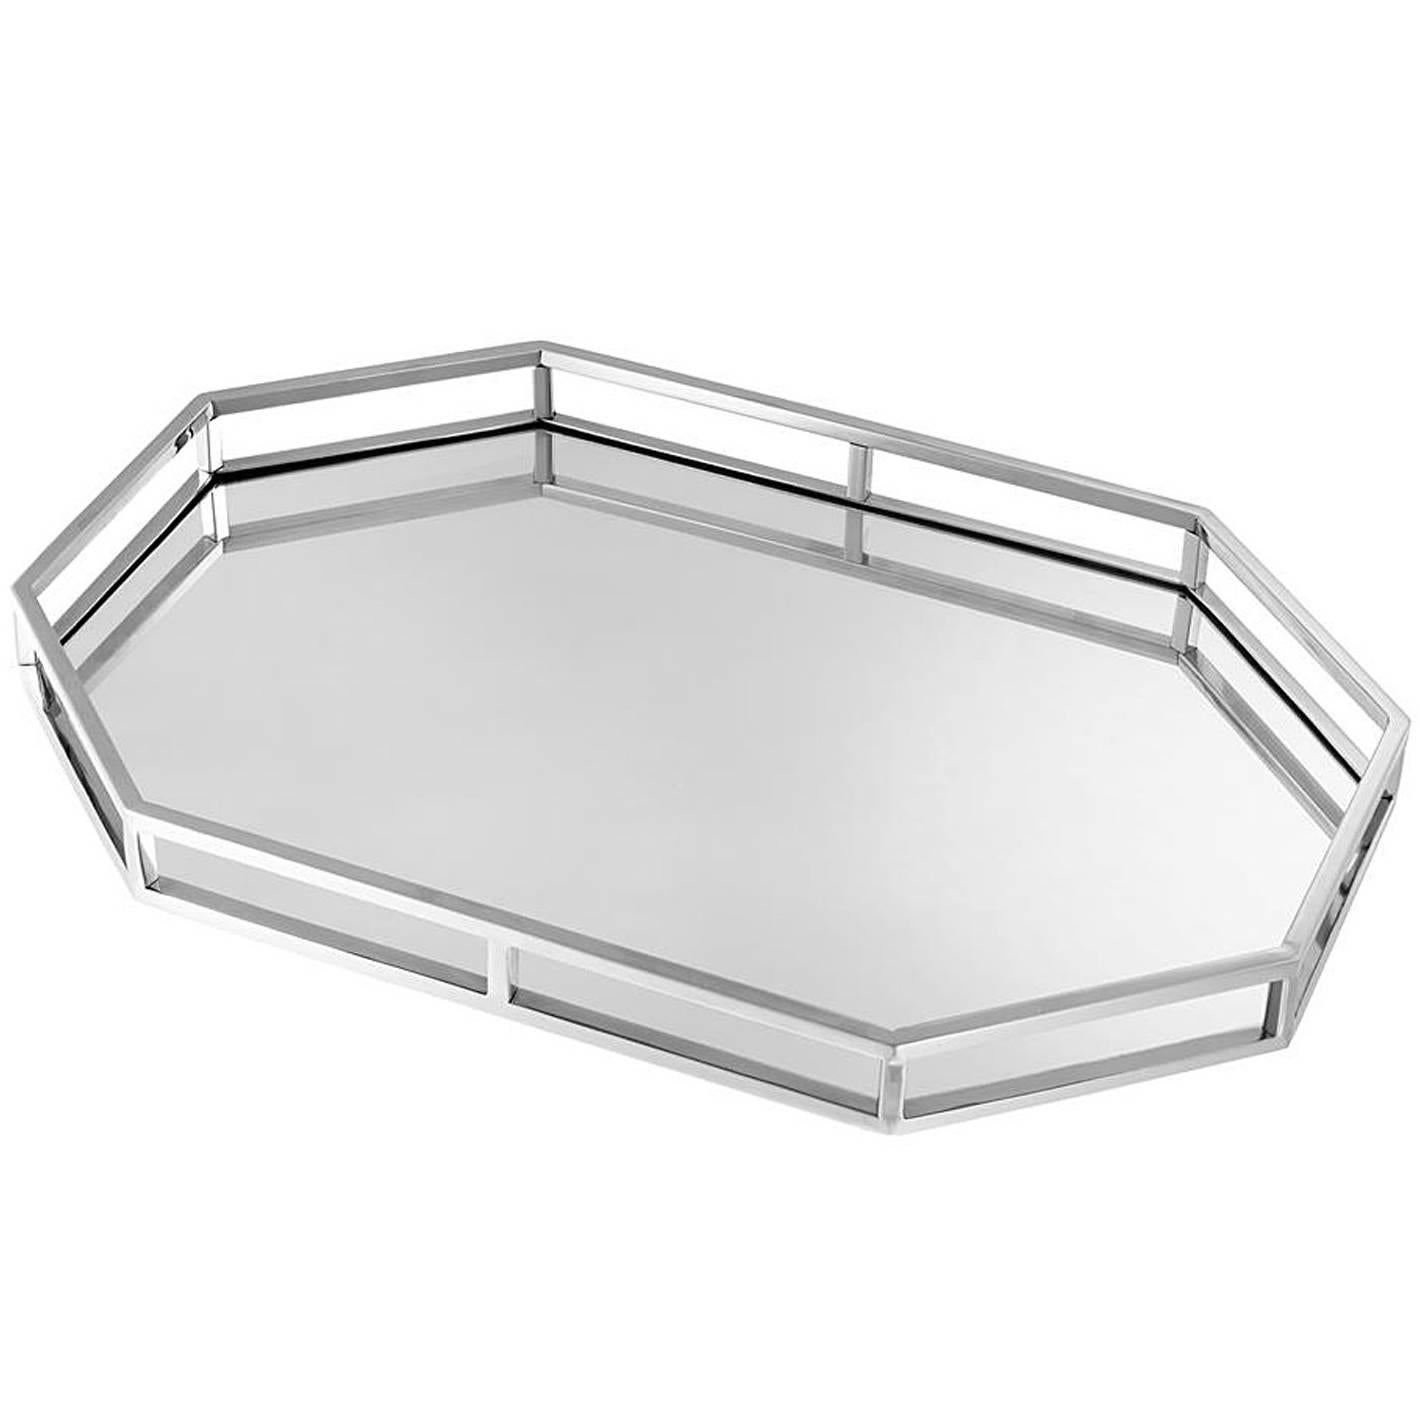 Sigma Tray in Nickel Finish and Mirror Glass